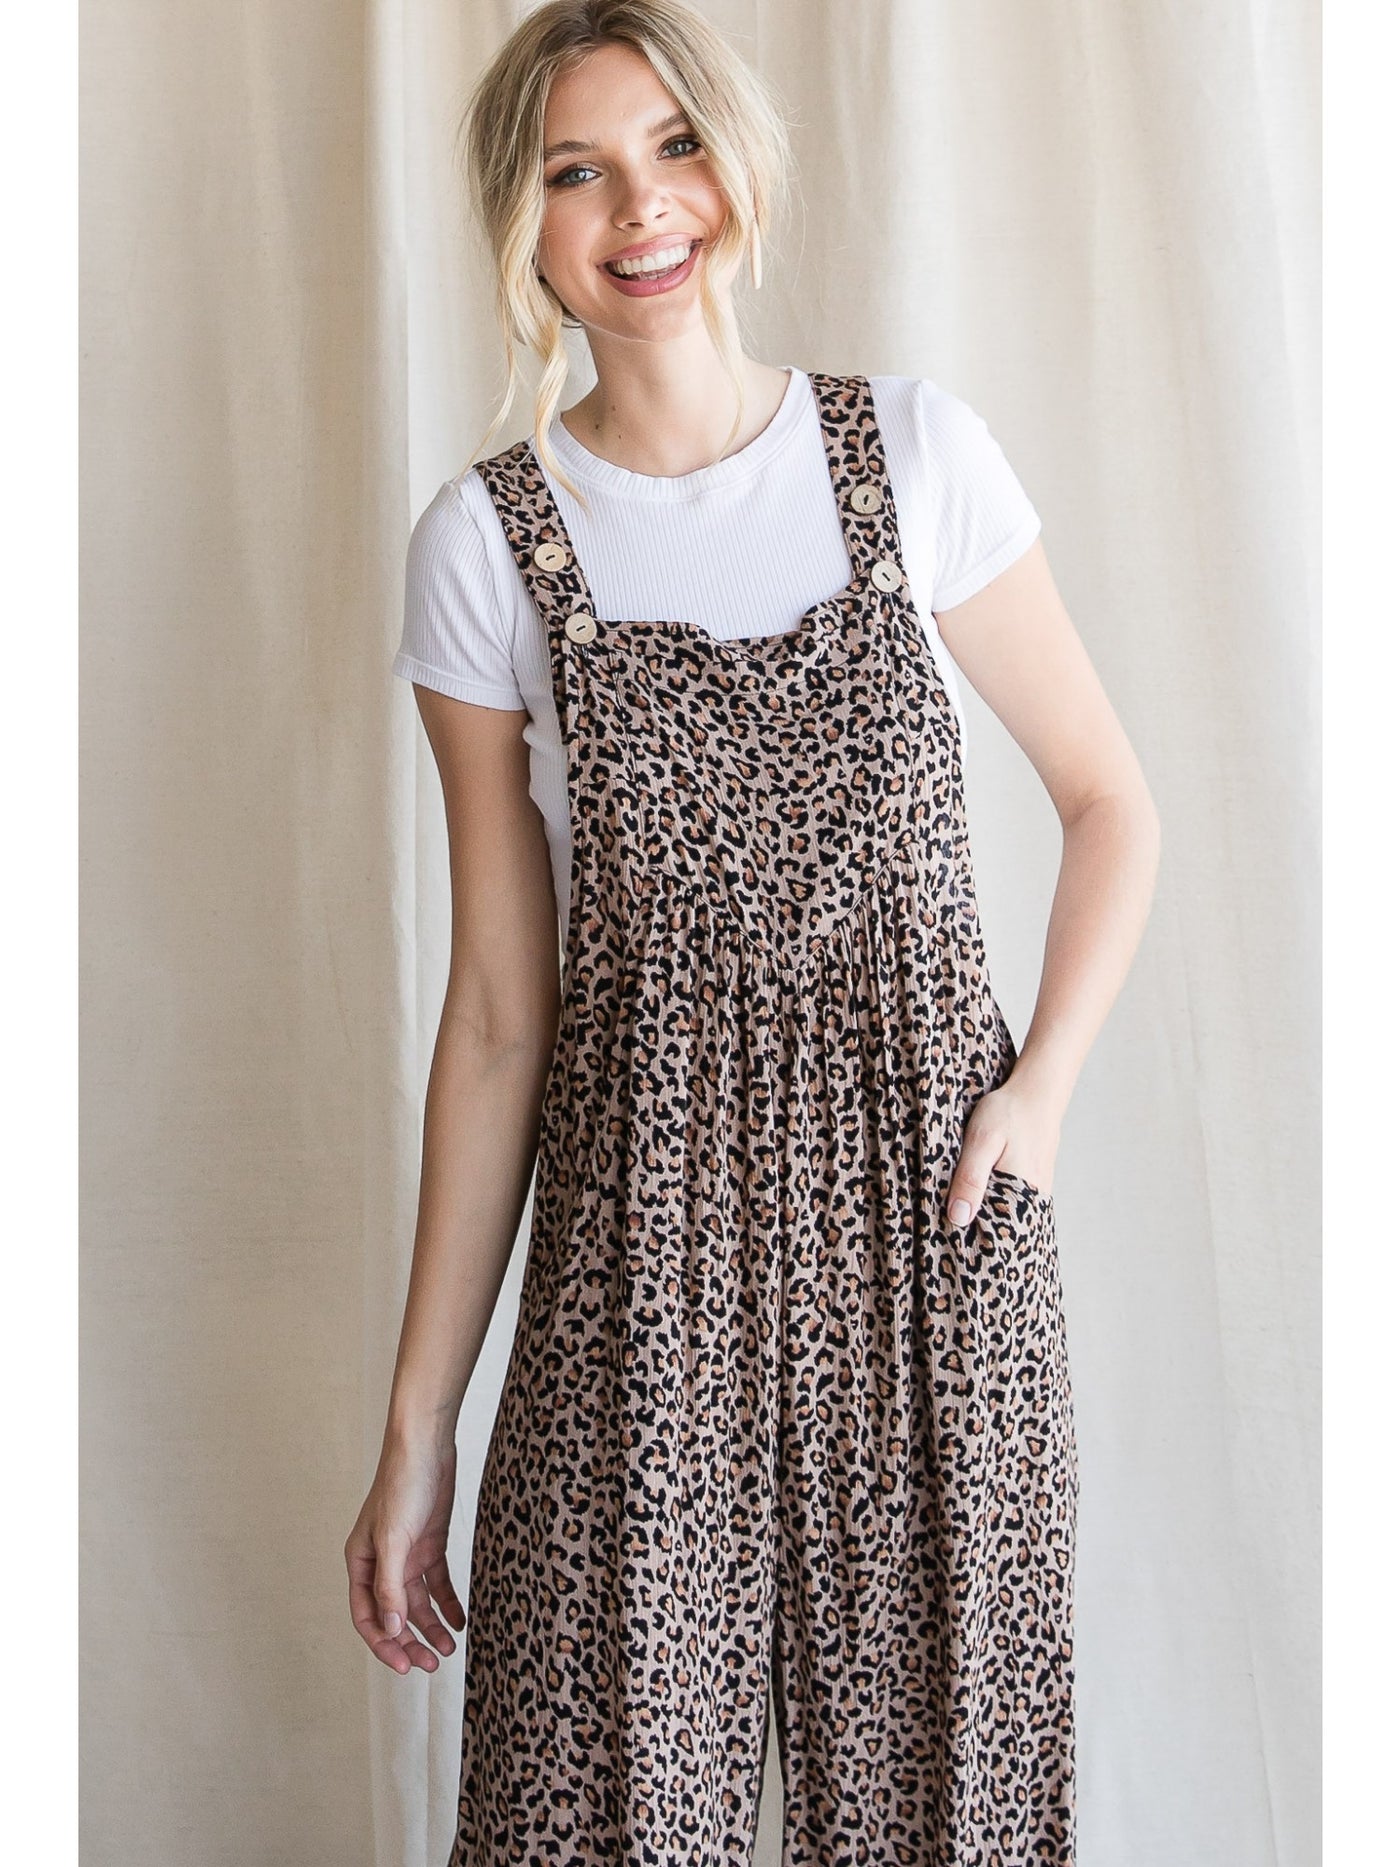 Safari Party Oversized Jumpsuit Overalls in Taupe